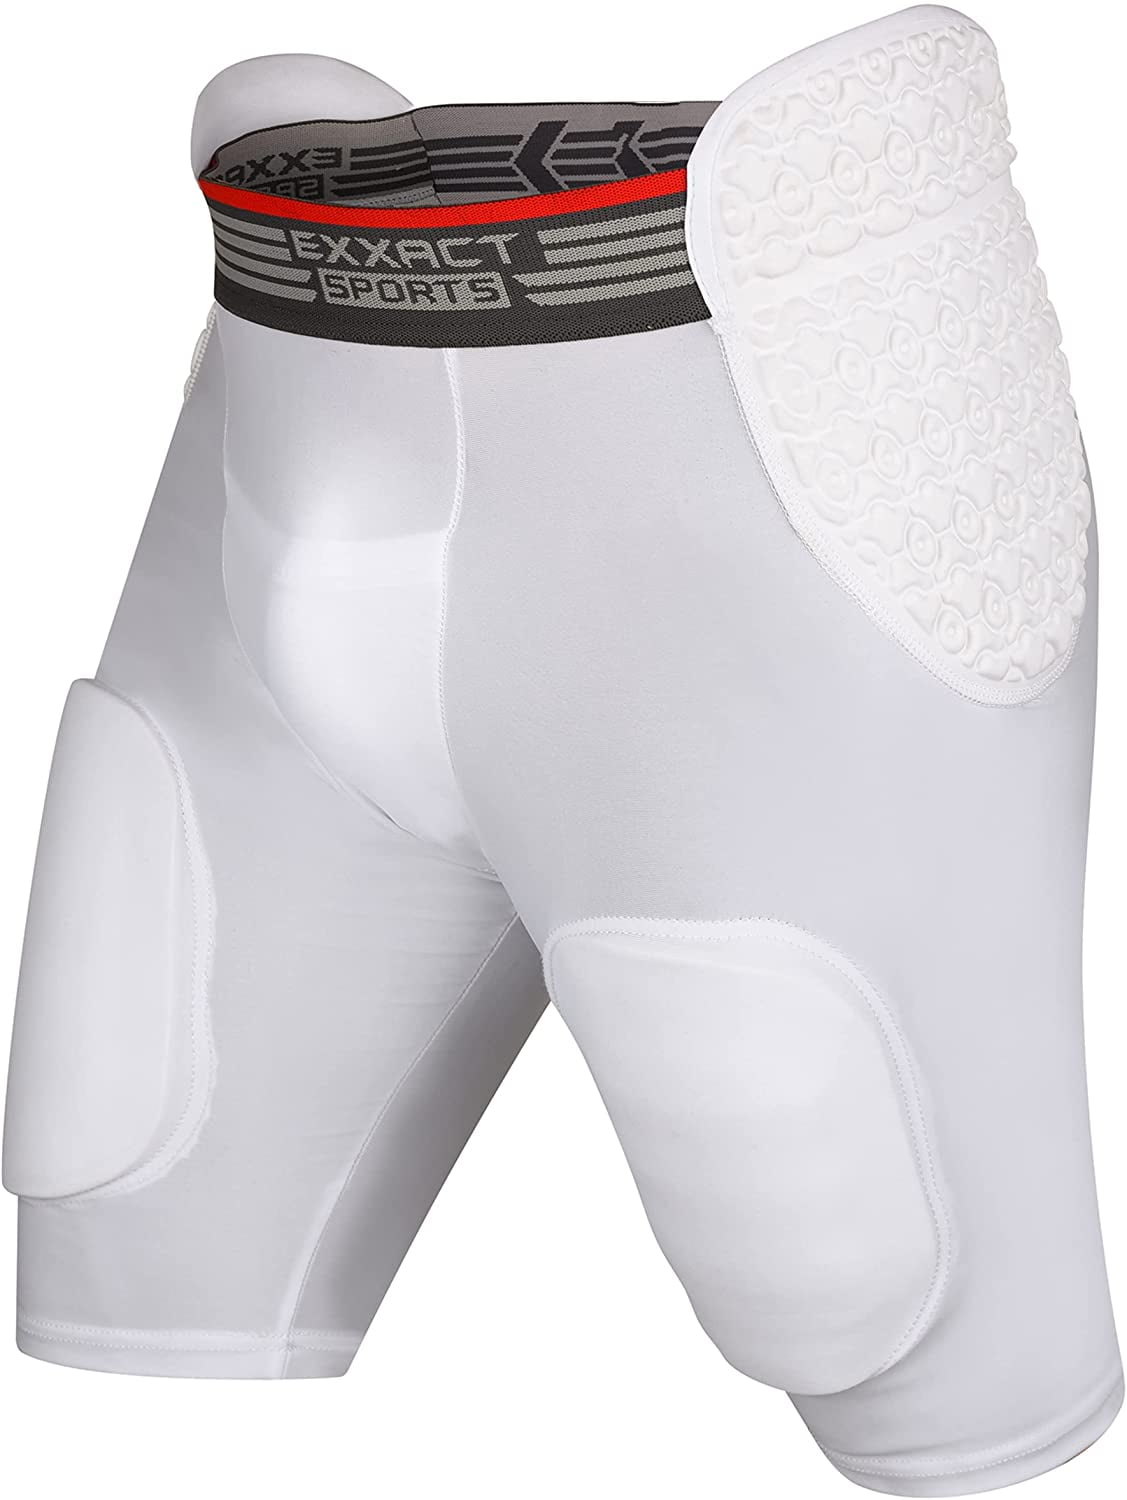 Hip and Tailbone Soft Pads and Cup Pocket McDavid Football Padded Girdle Compression Shorts with Hard-Shell Thigh Protection 